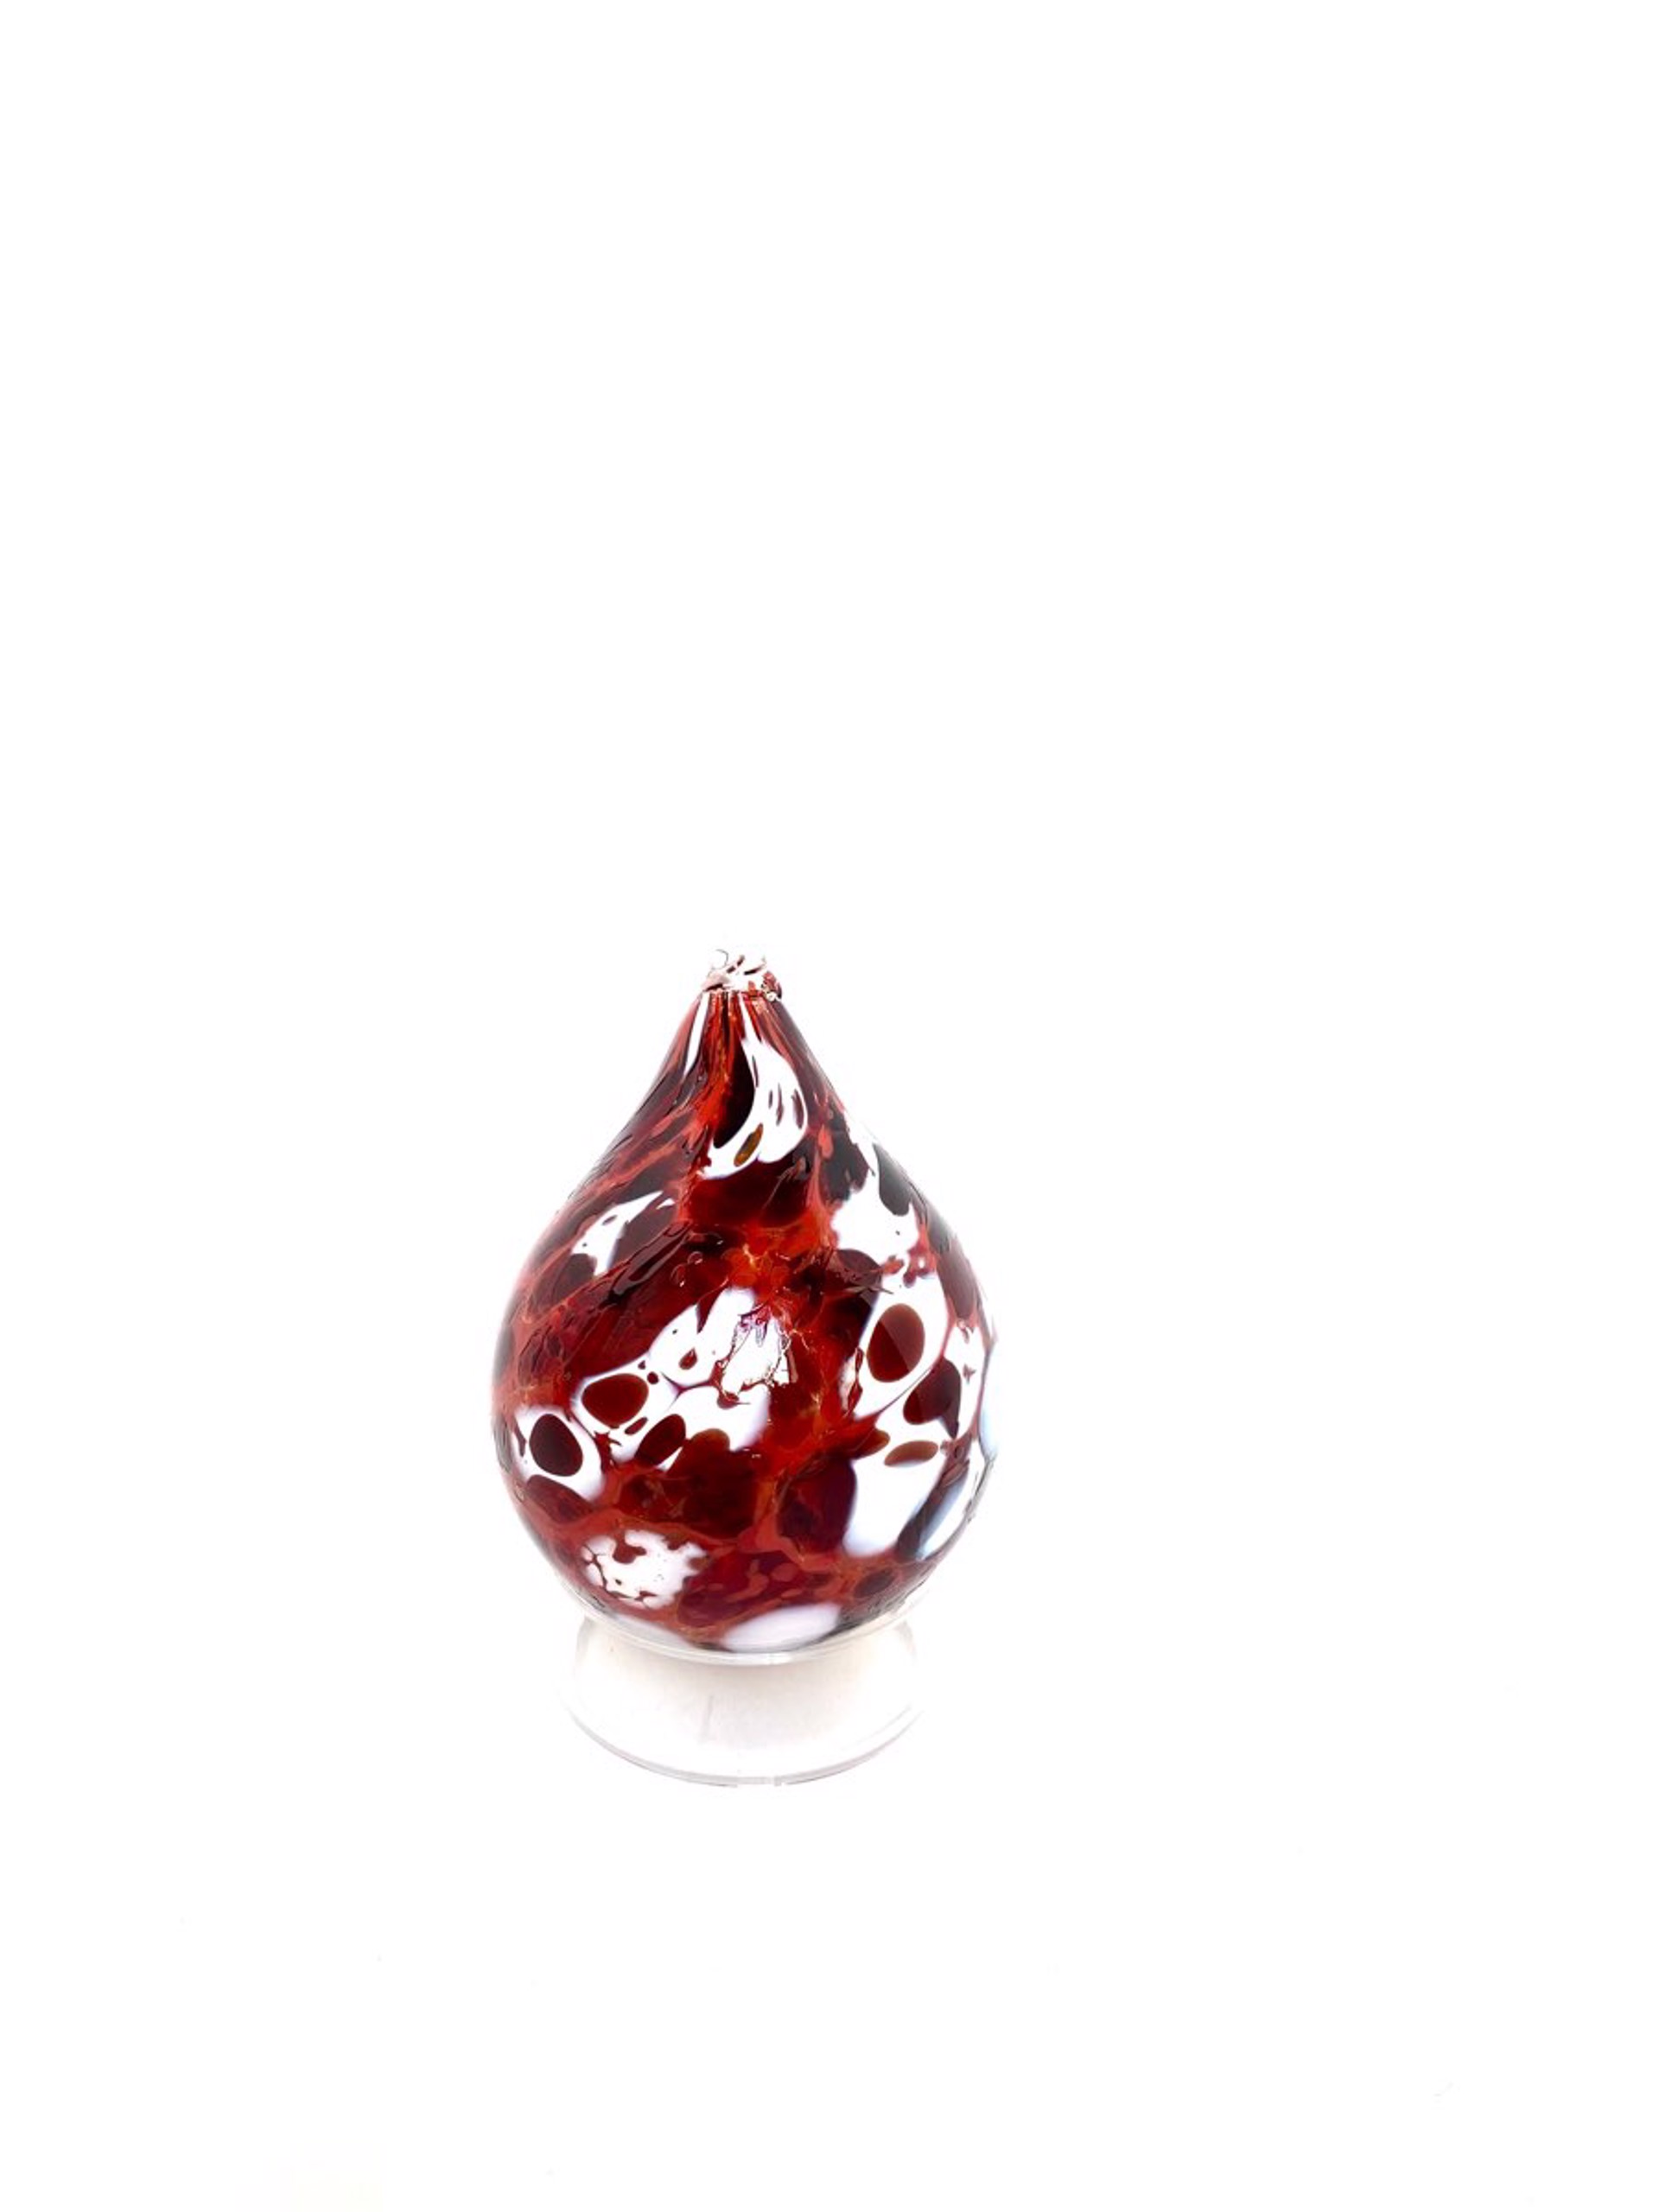 Teardrop Ornament by Chad Balster